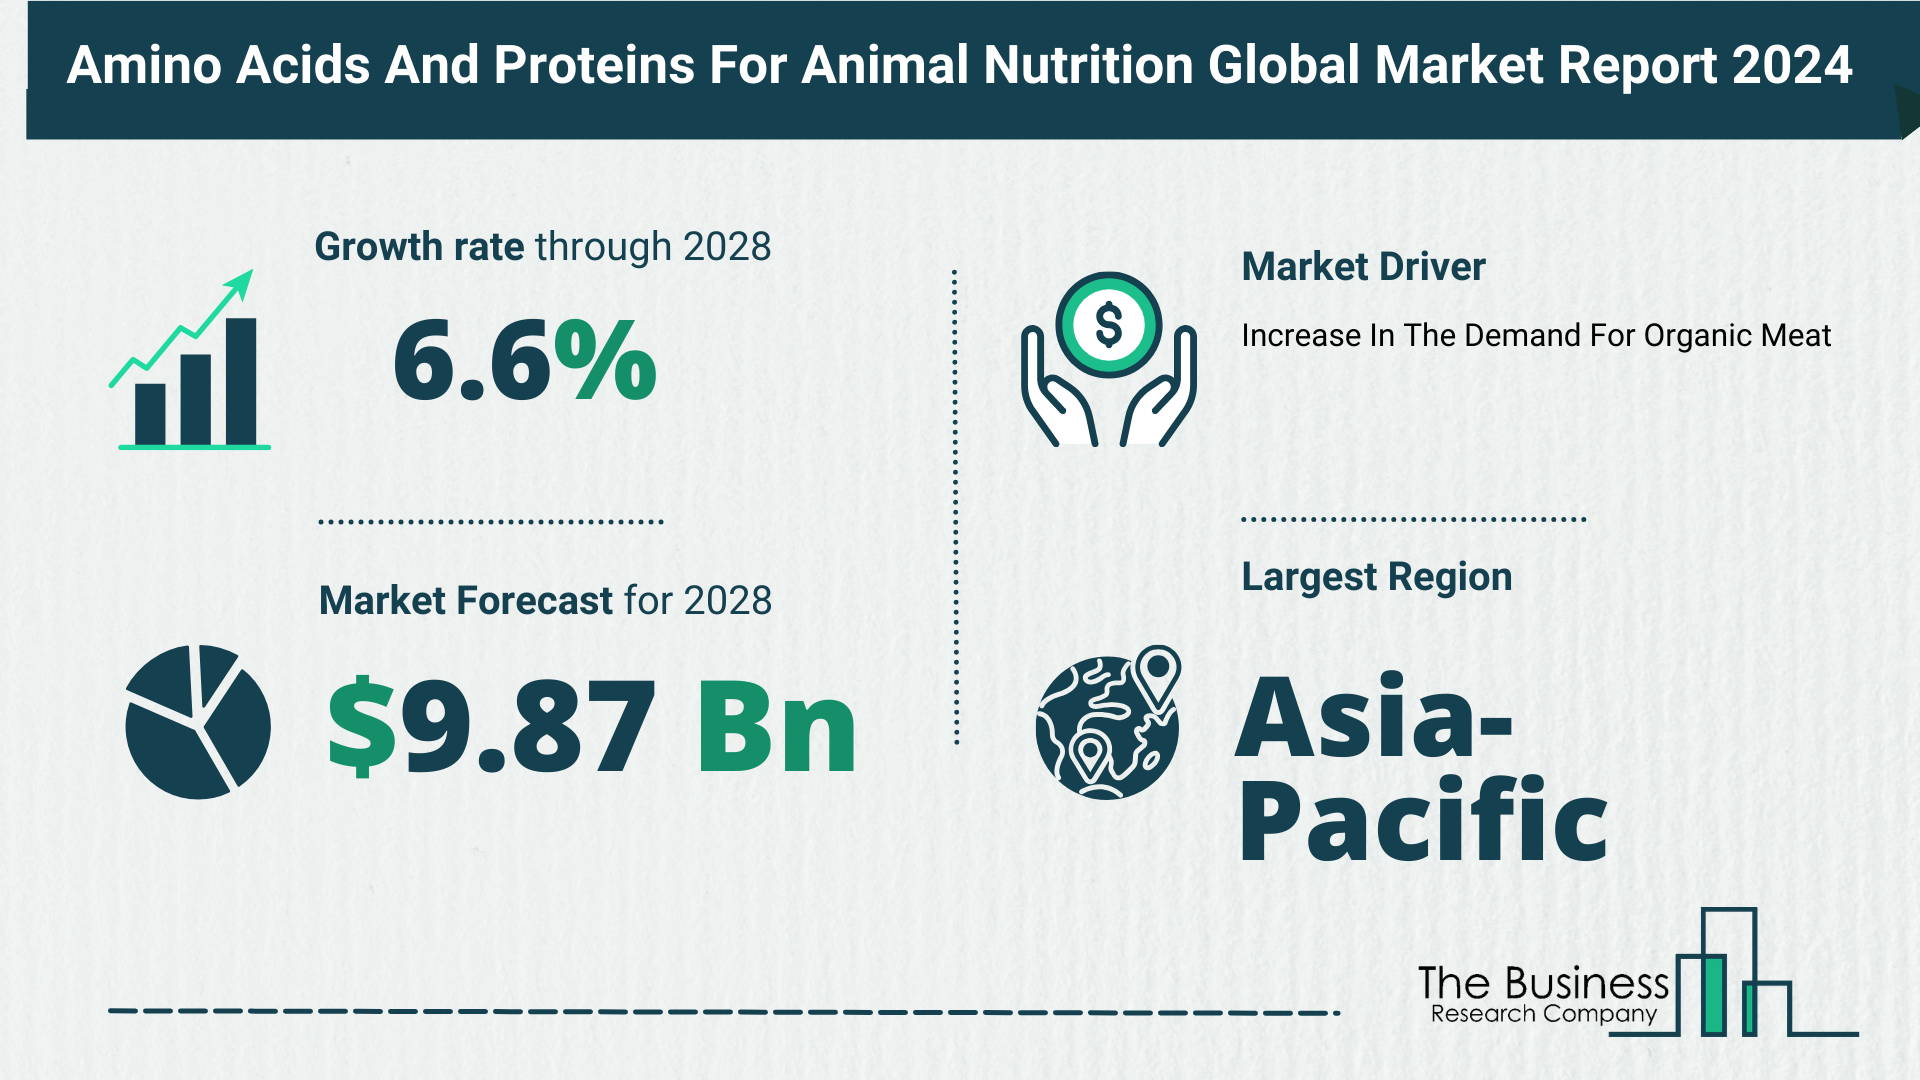 Global Amino Acids And Proteins For Animal Nutrition Market Overview 2024: Size, Drivers, And Trends